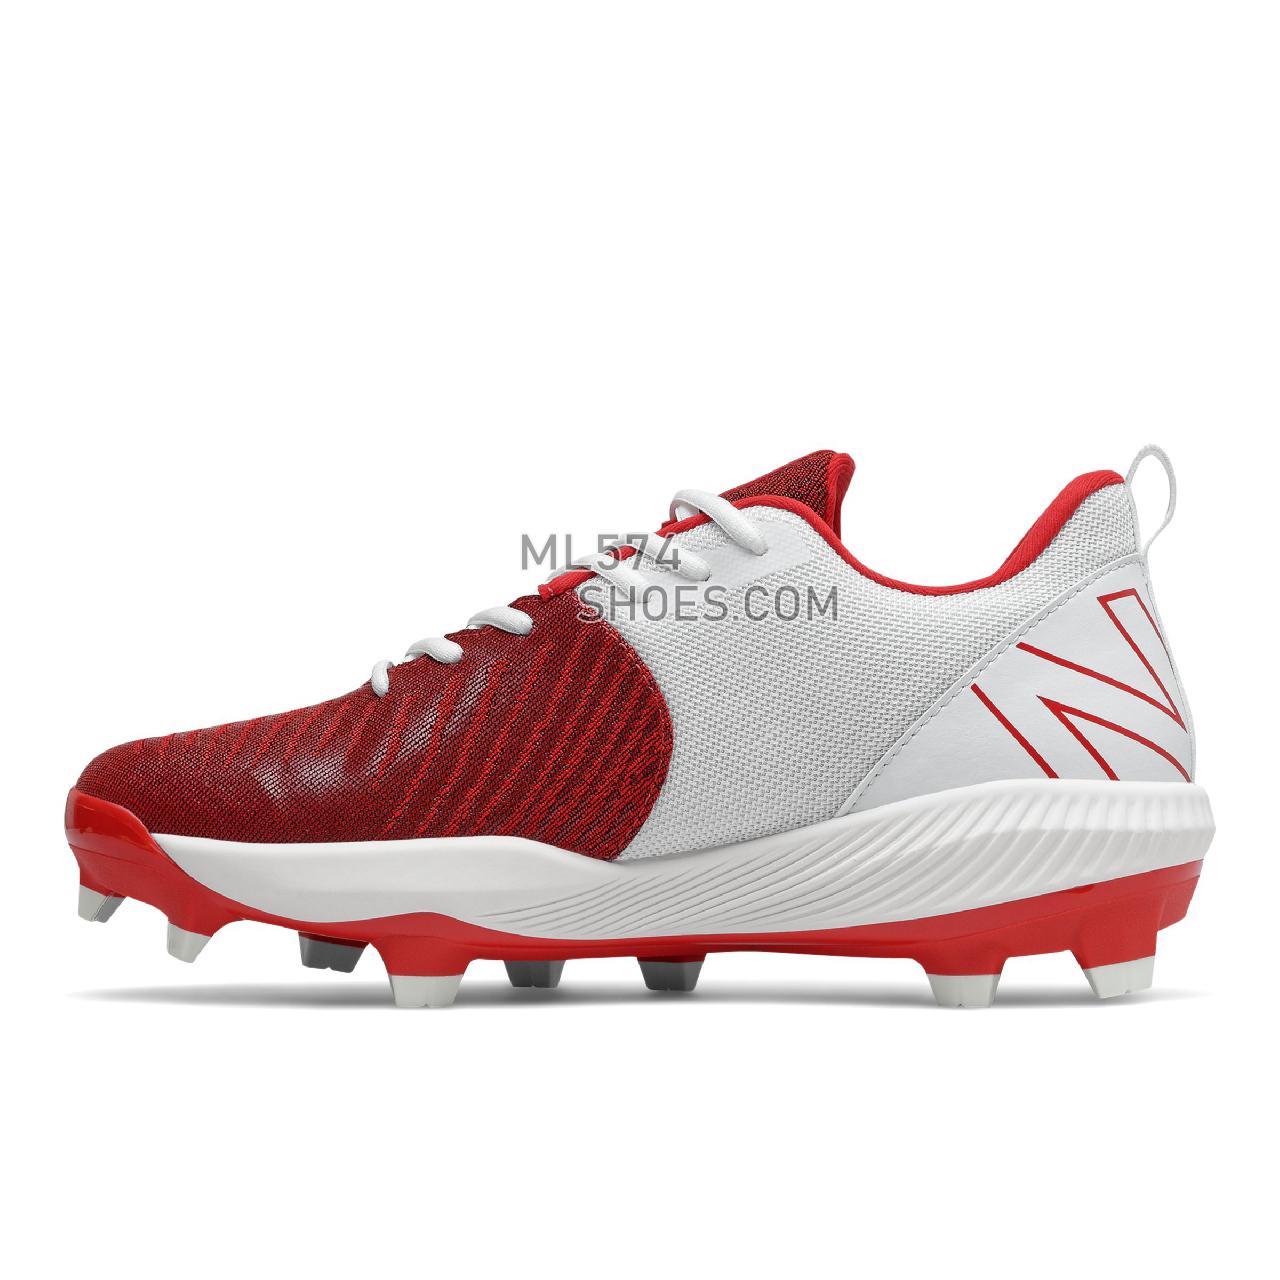 New Balance FuelCell 4040 v6 Molded - Men's Mid-Cut Baseball Cleats - Team Red with White - PL4040R6